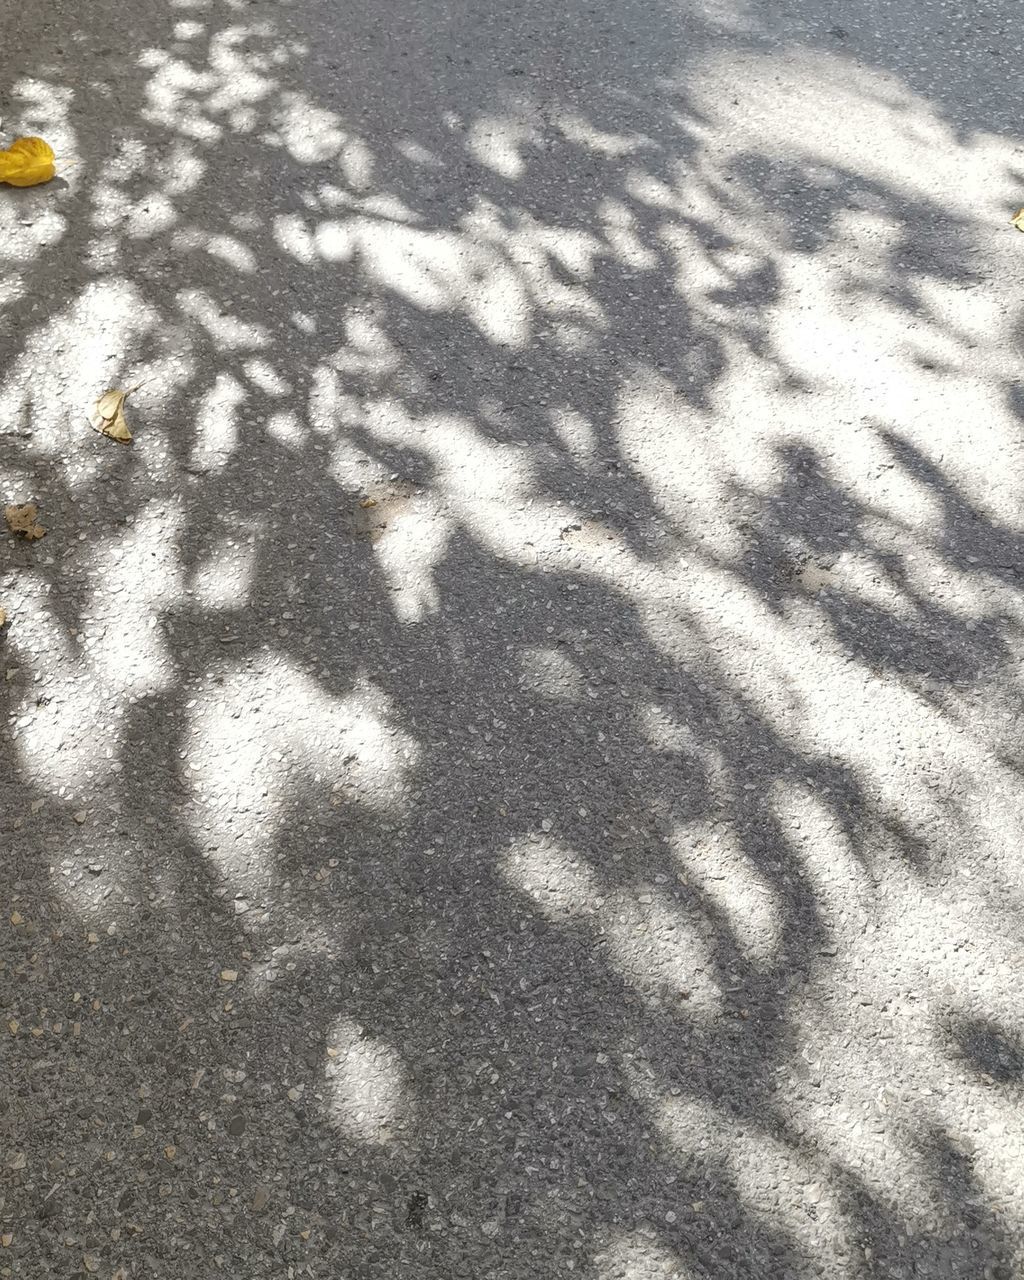 HIGH ANGLE VIEW OF SHADOW ON ROAD